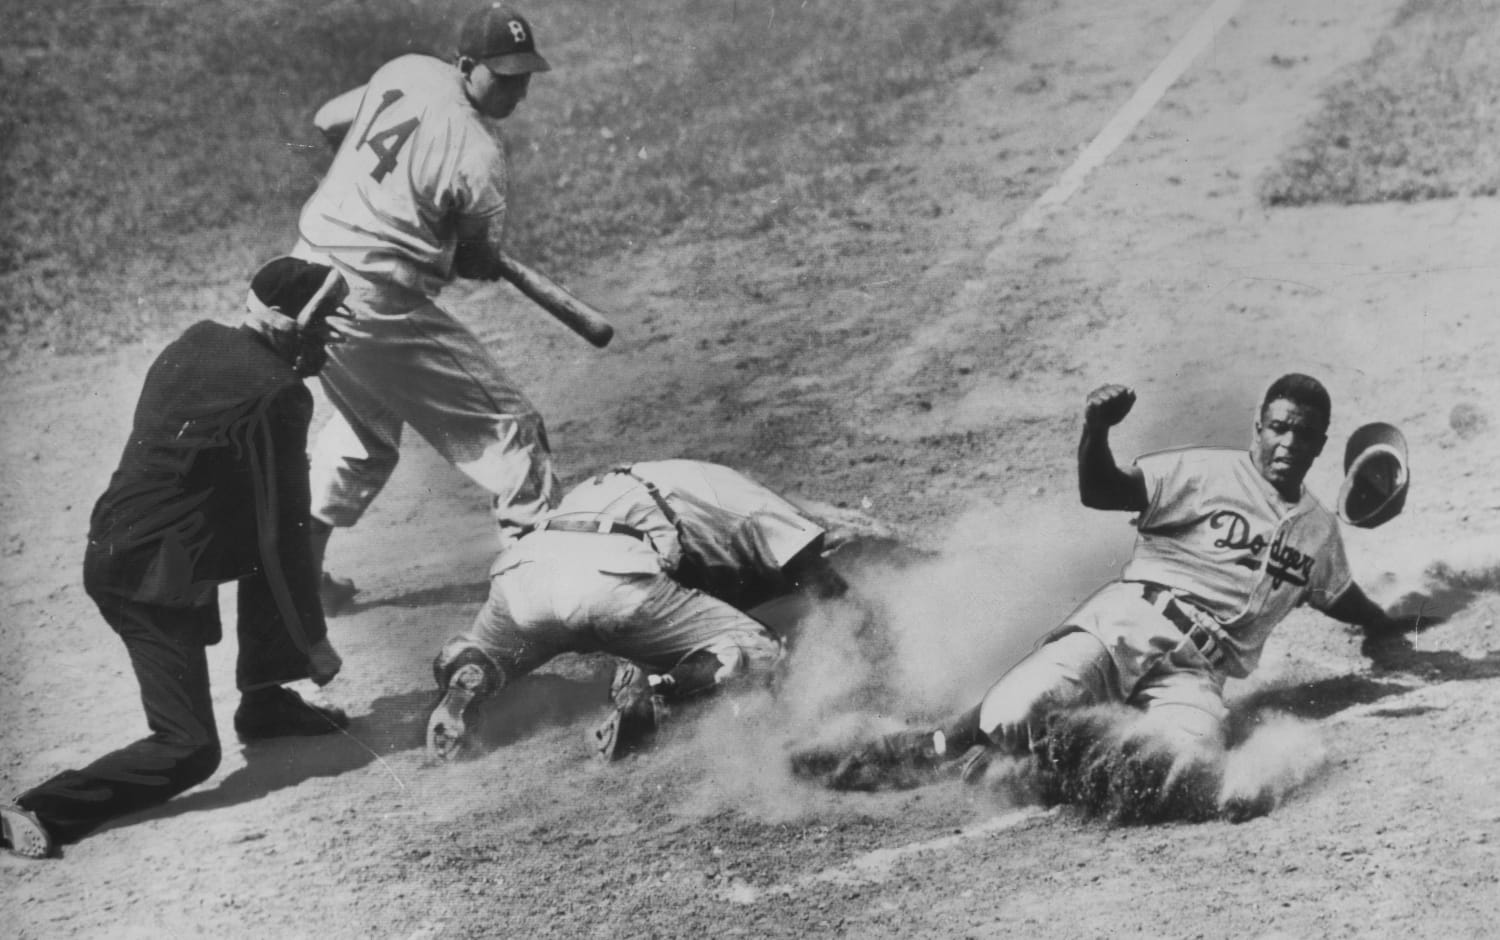 A barrage of racial slurs is directed at Jackie Robinson by the Cincinnati  fans at Crosley Field Brooklyn shortstop Pee Wee Reese, a Southerner from  Kentucky puts his arm around his teammate's